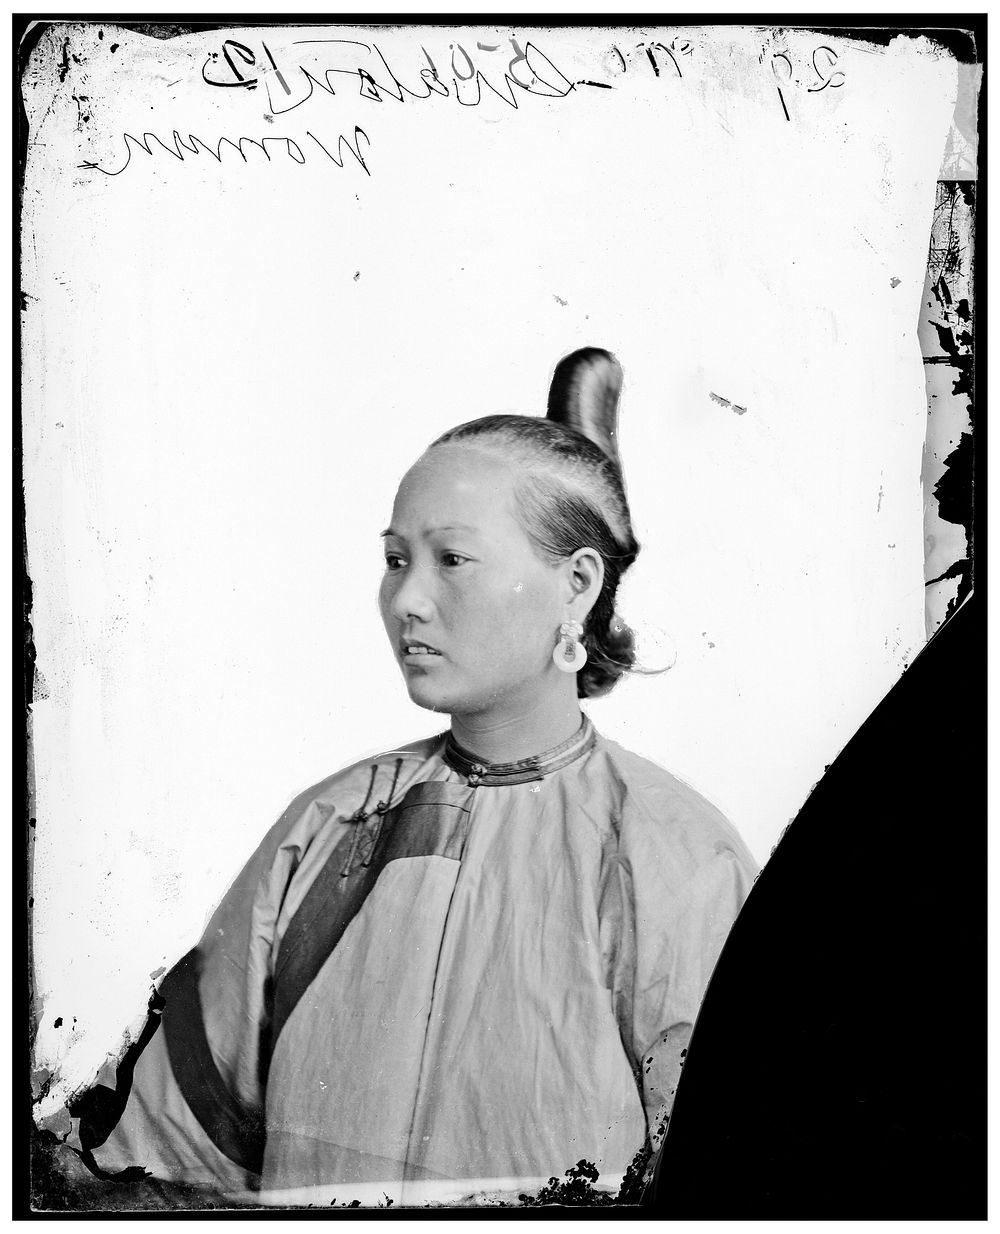 Shantou (Swatow), Guangdong (Kwangtung) province, China: a woman with prominent coiffure. Photograph by John Thomson, 1871.